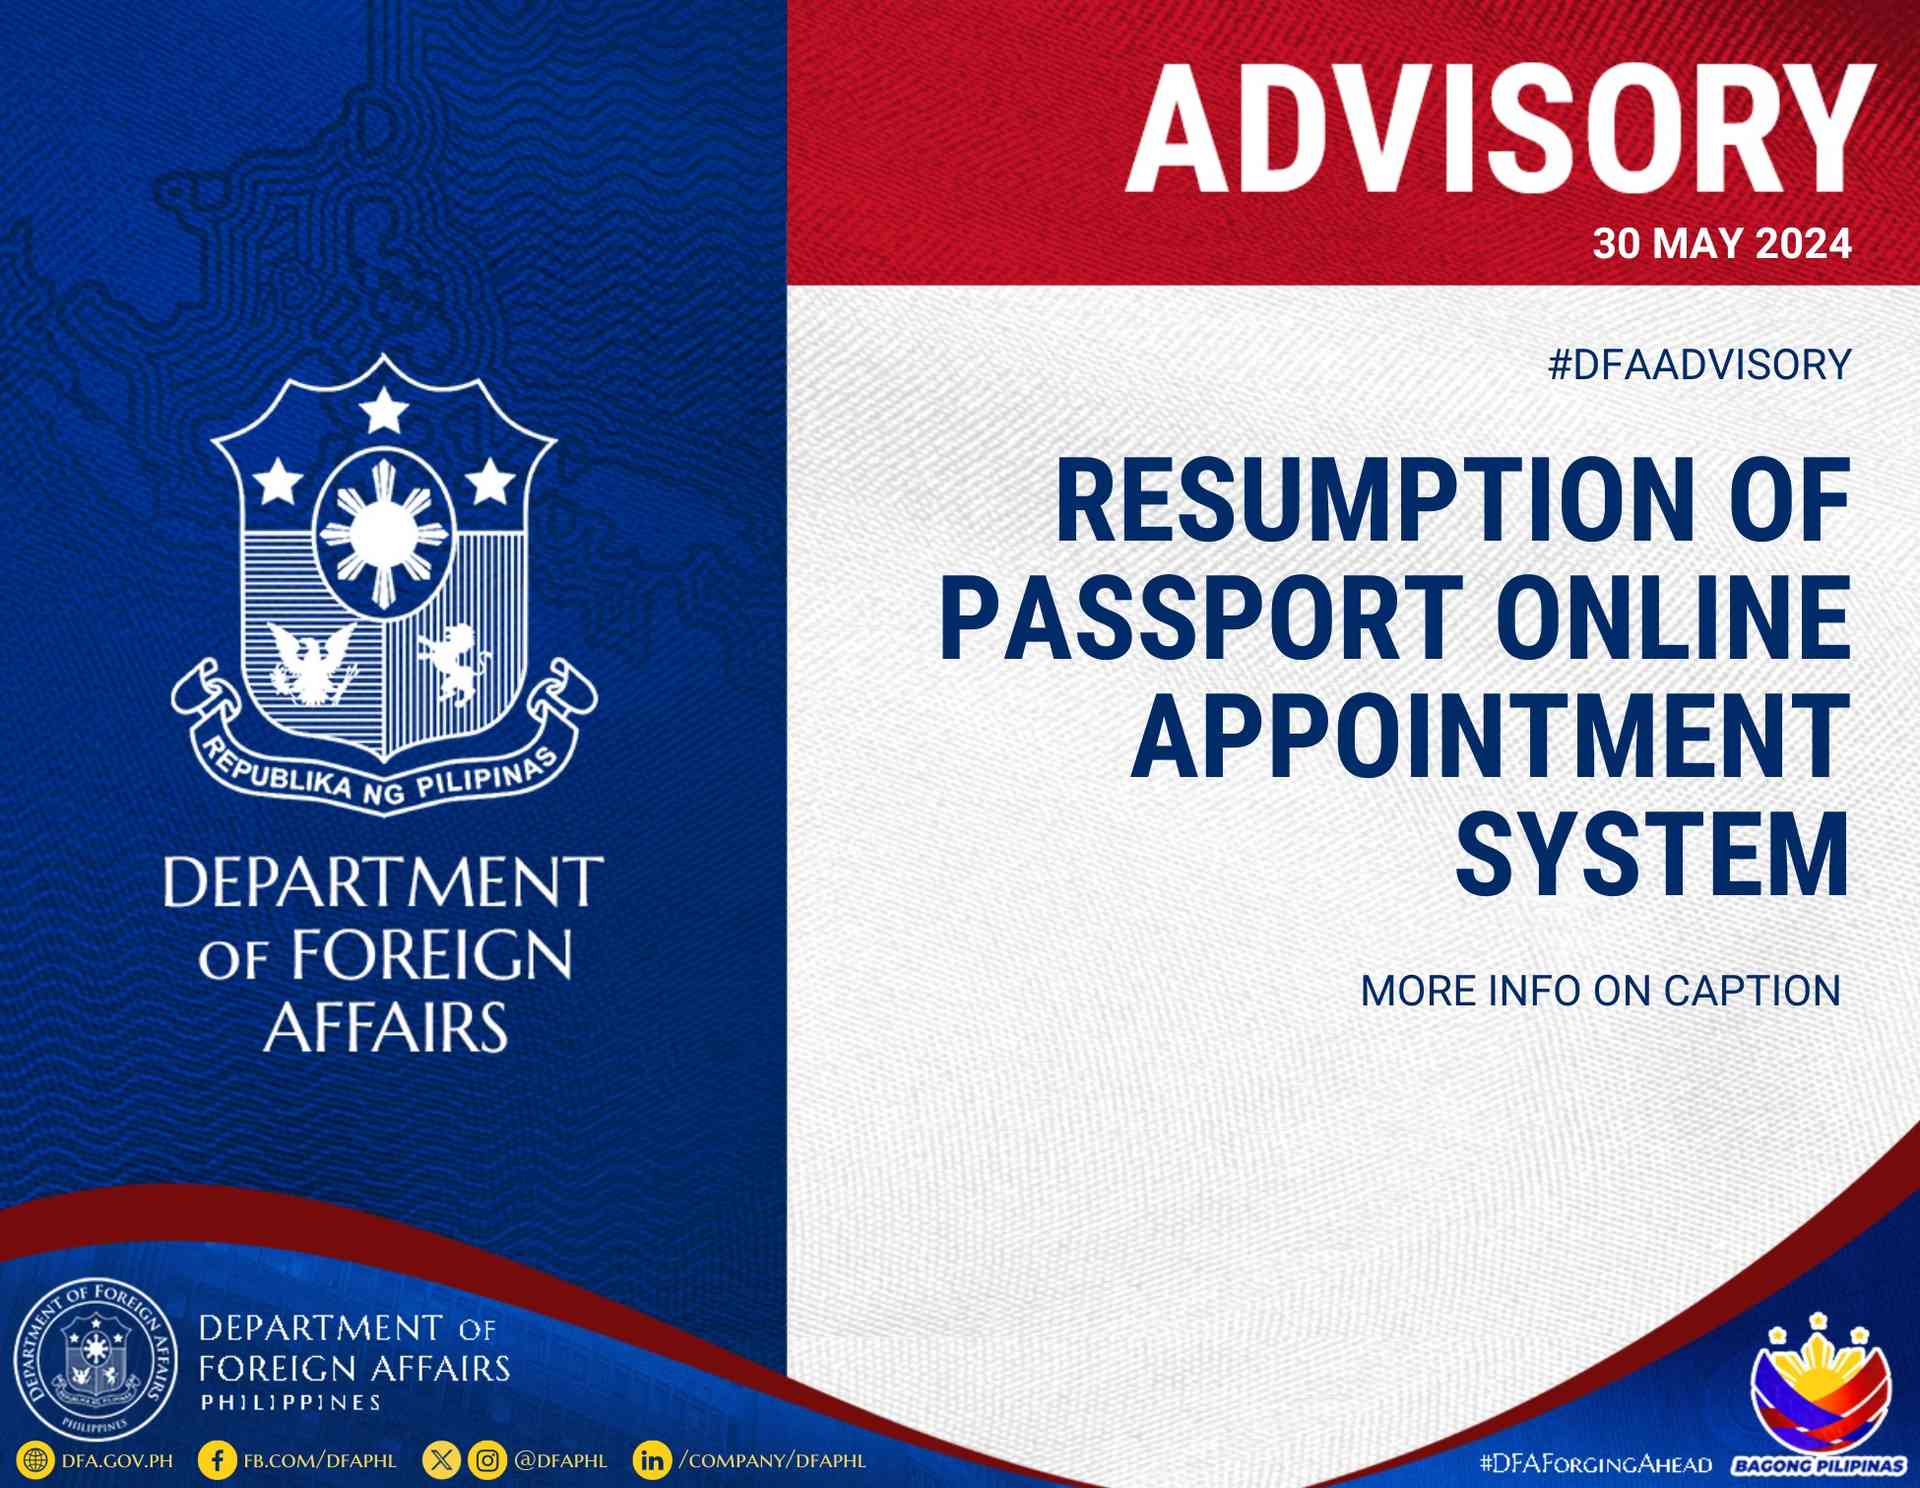 Operation of Passport Online Appointment System resumes – DFA